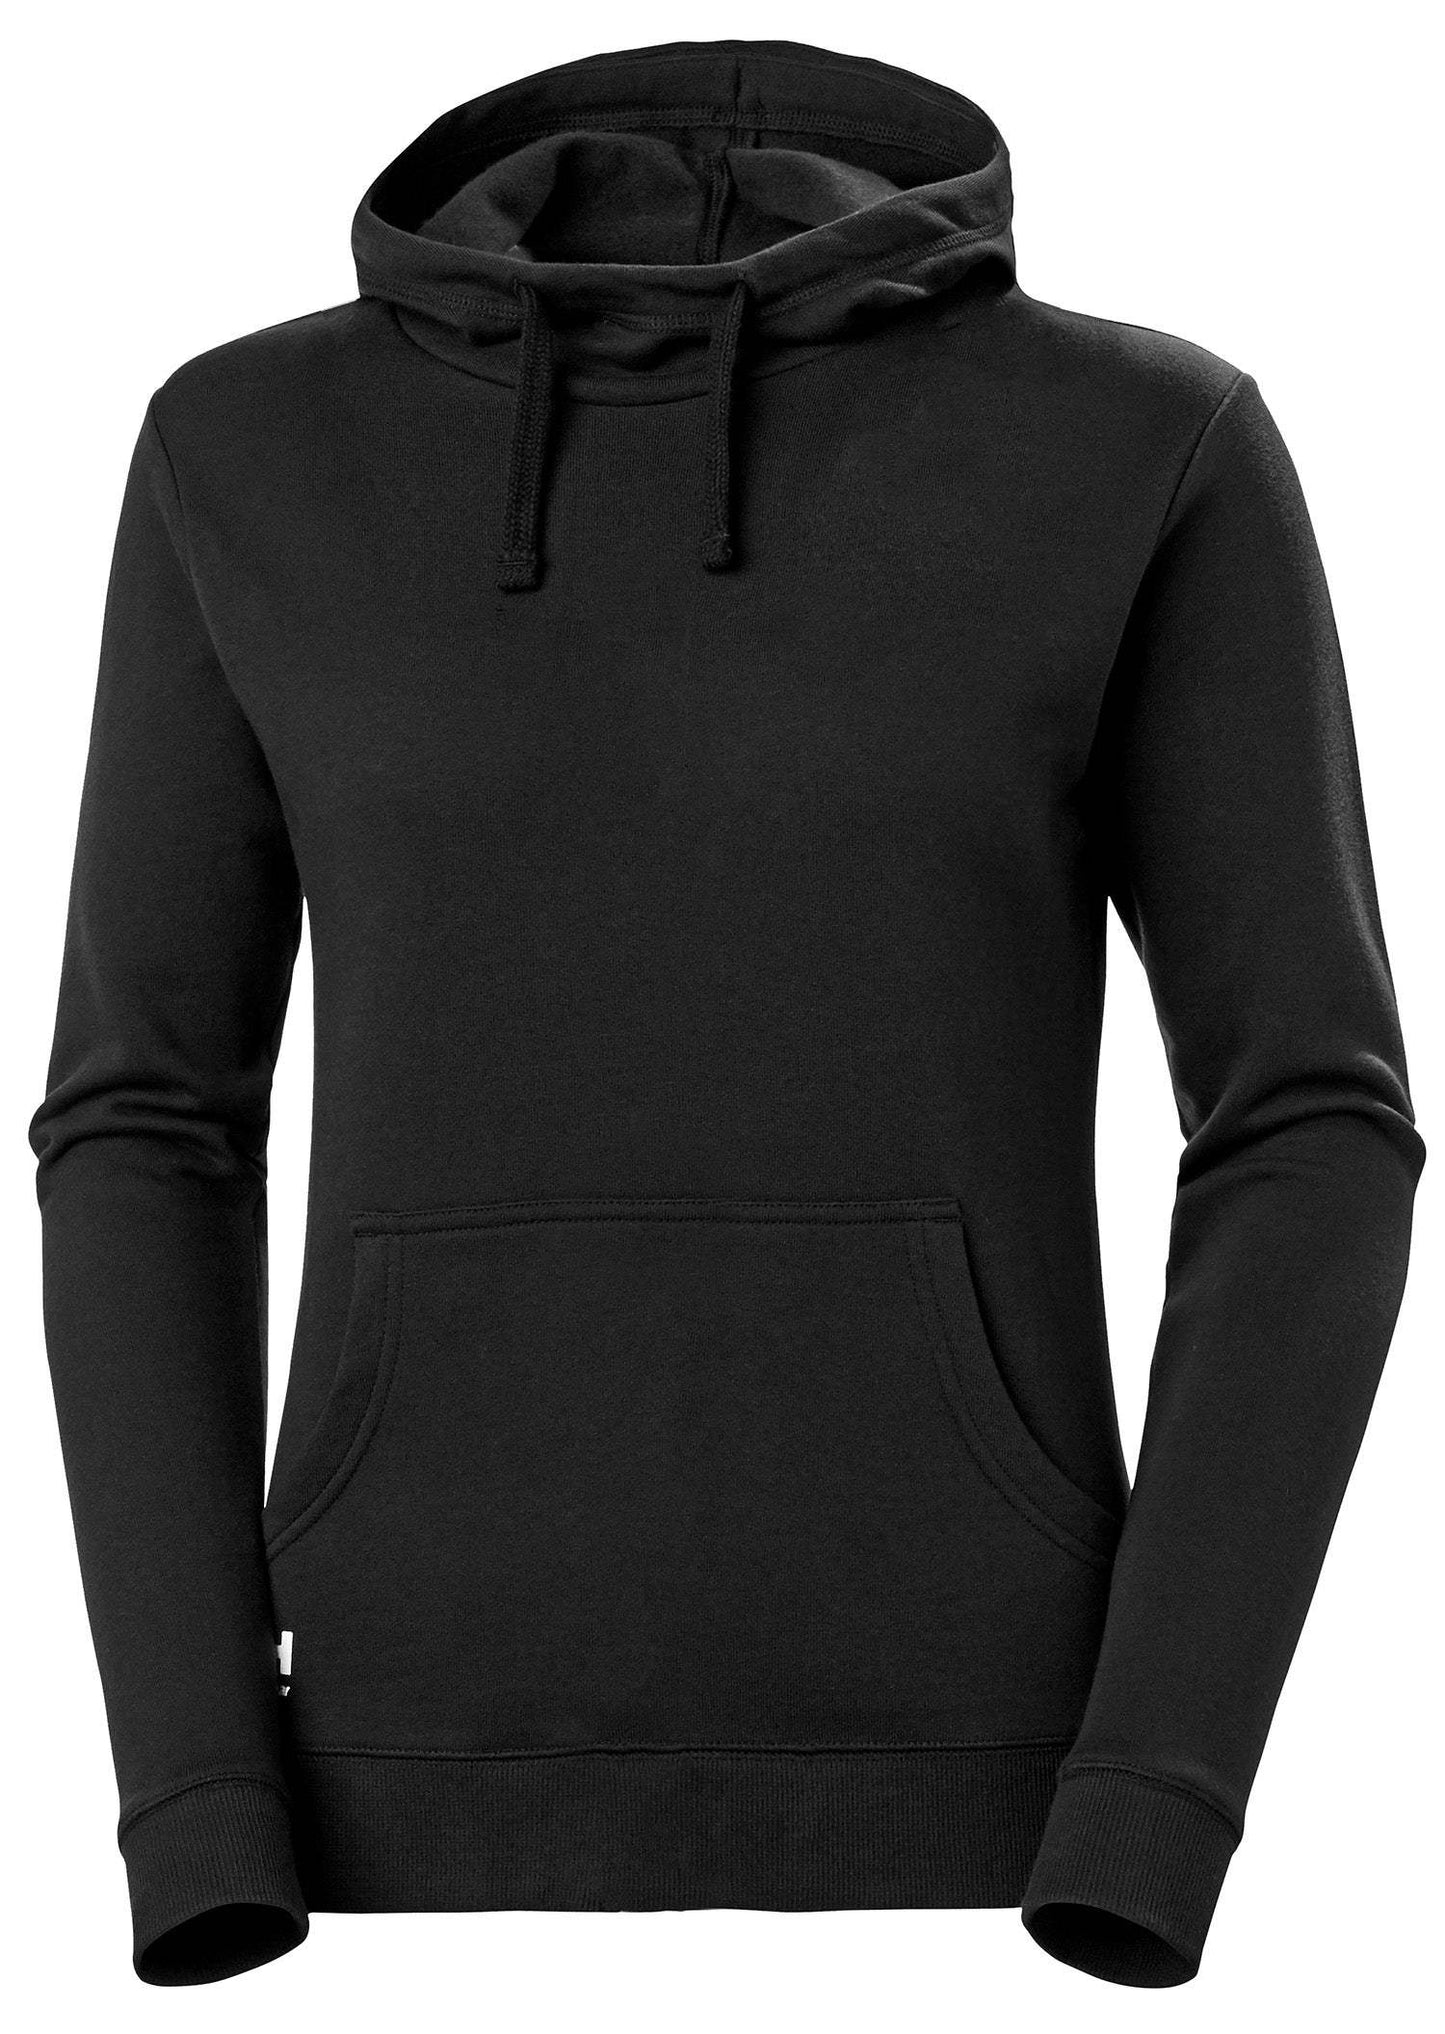 Helly Hansen Women’s Manchester Hoodie - The Luxury Promotional Gifts Company Limited